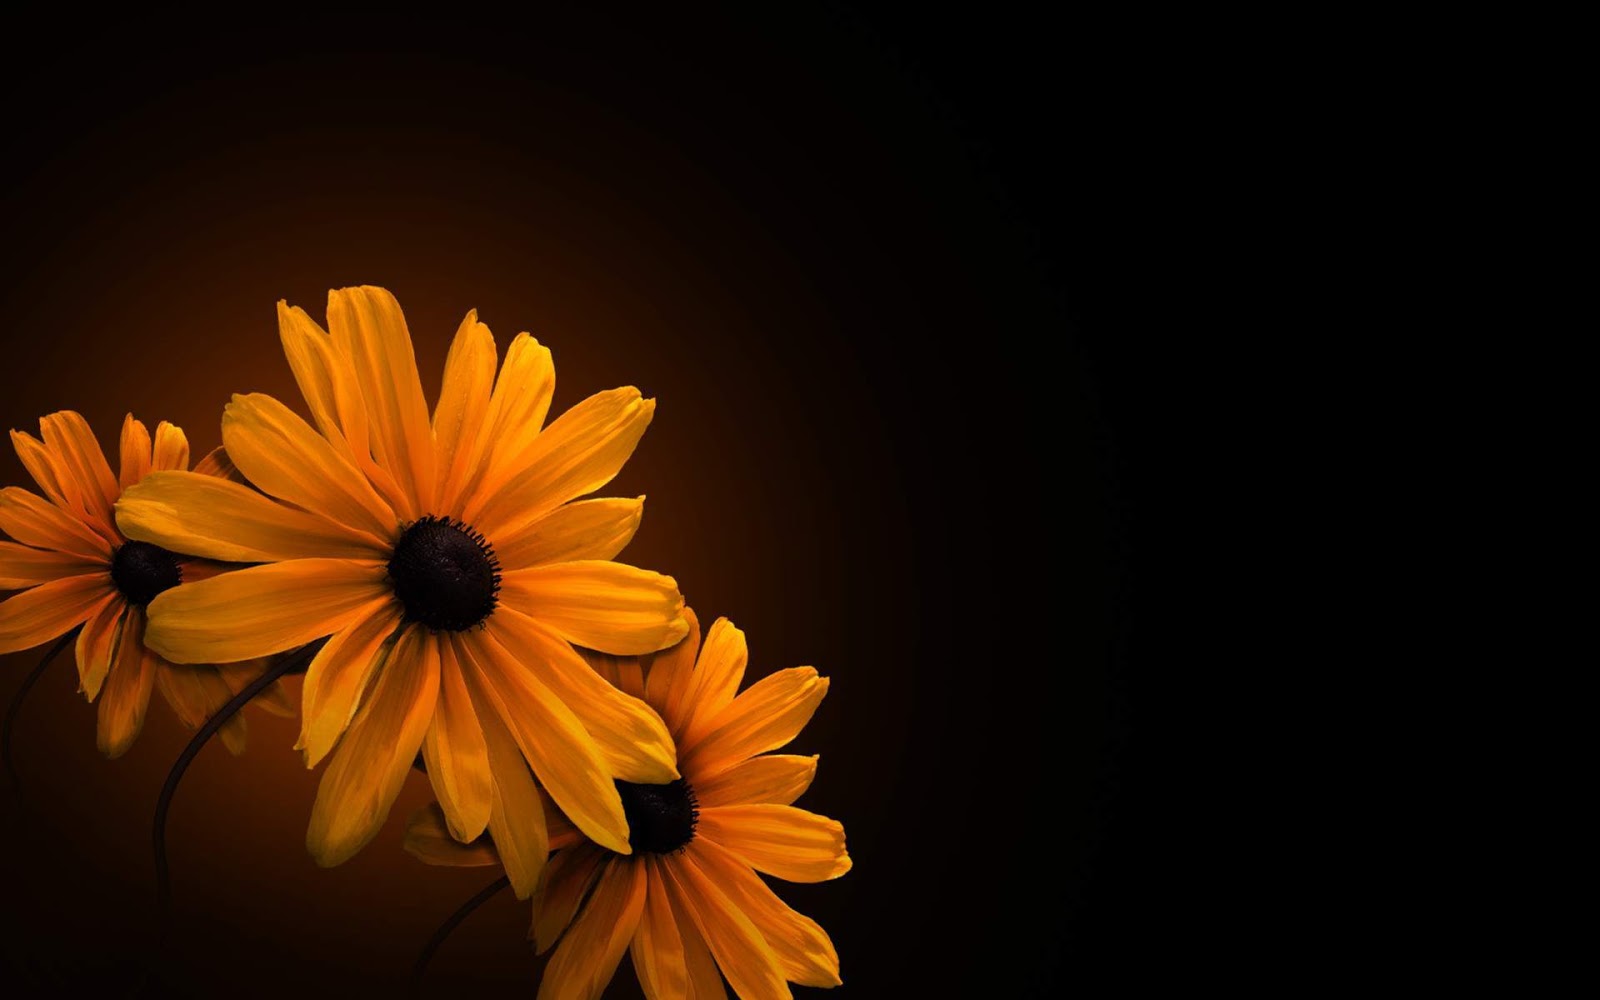  48 Black  Background  Wallpaper  with Flowers  on 